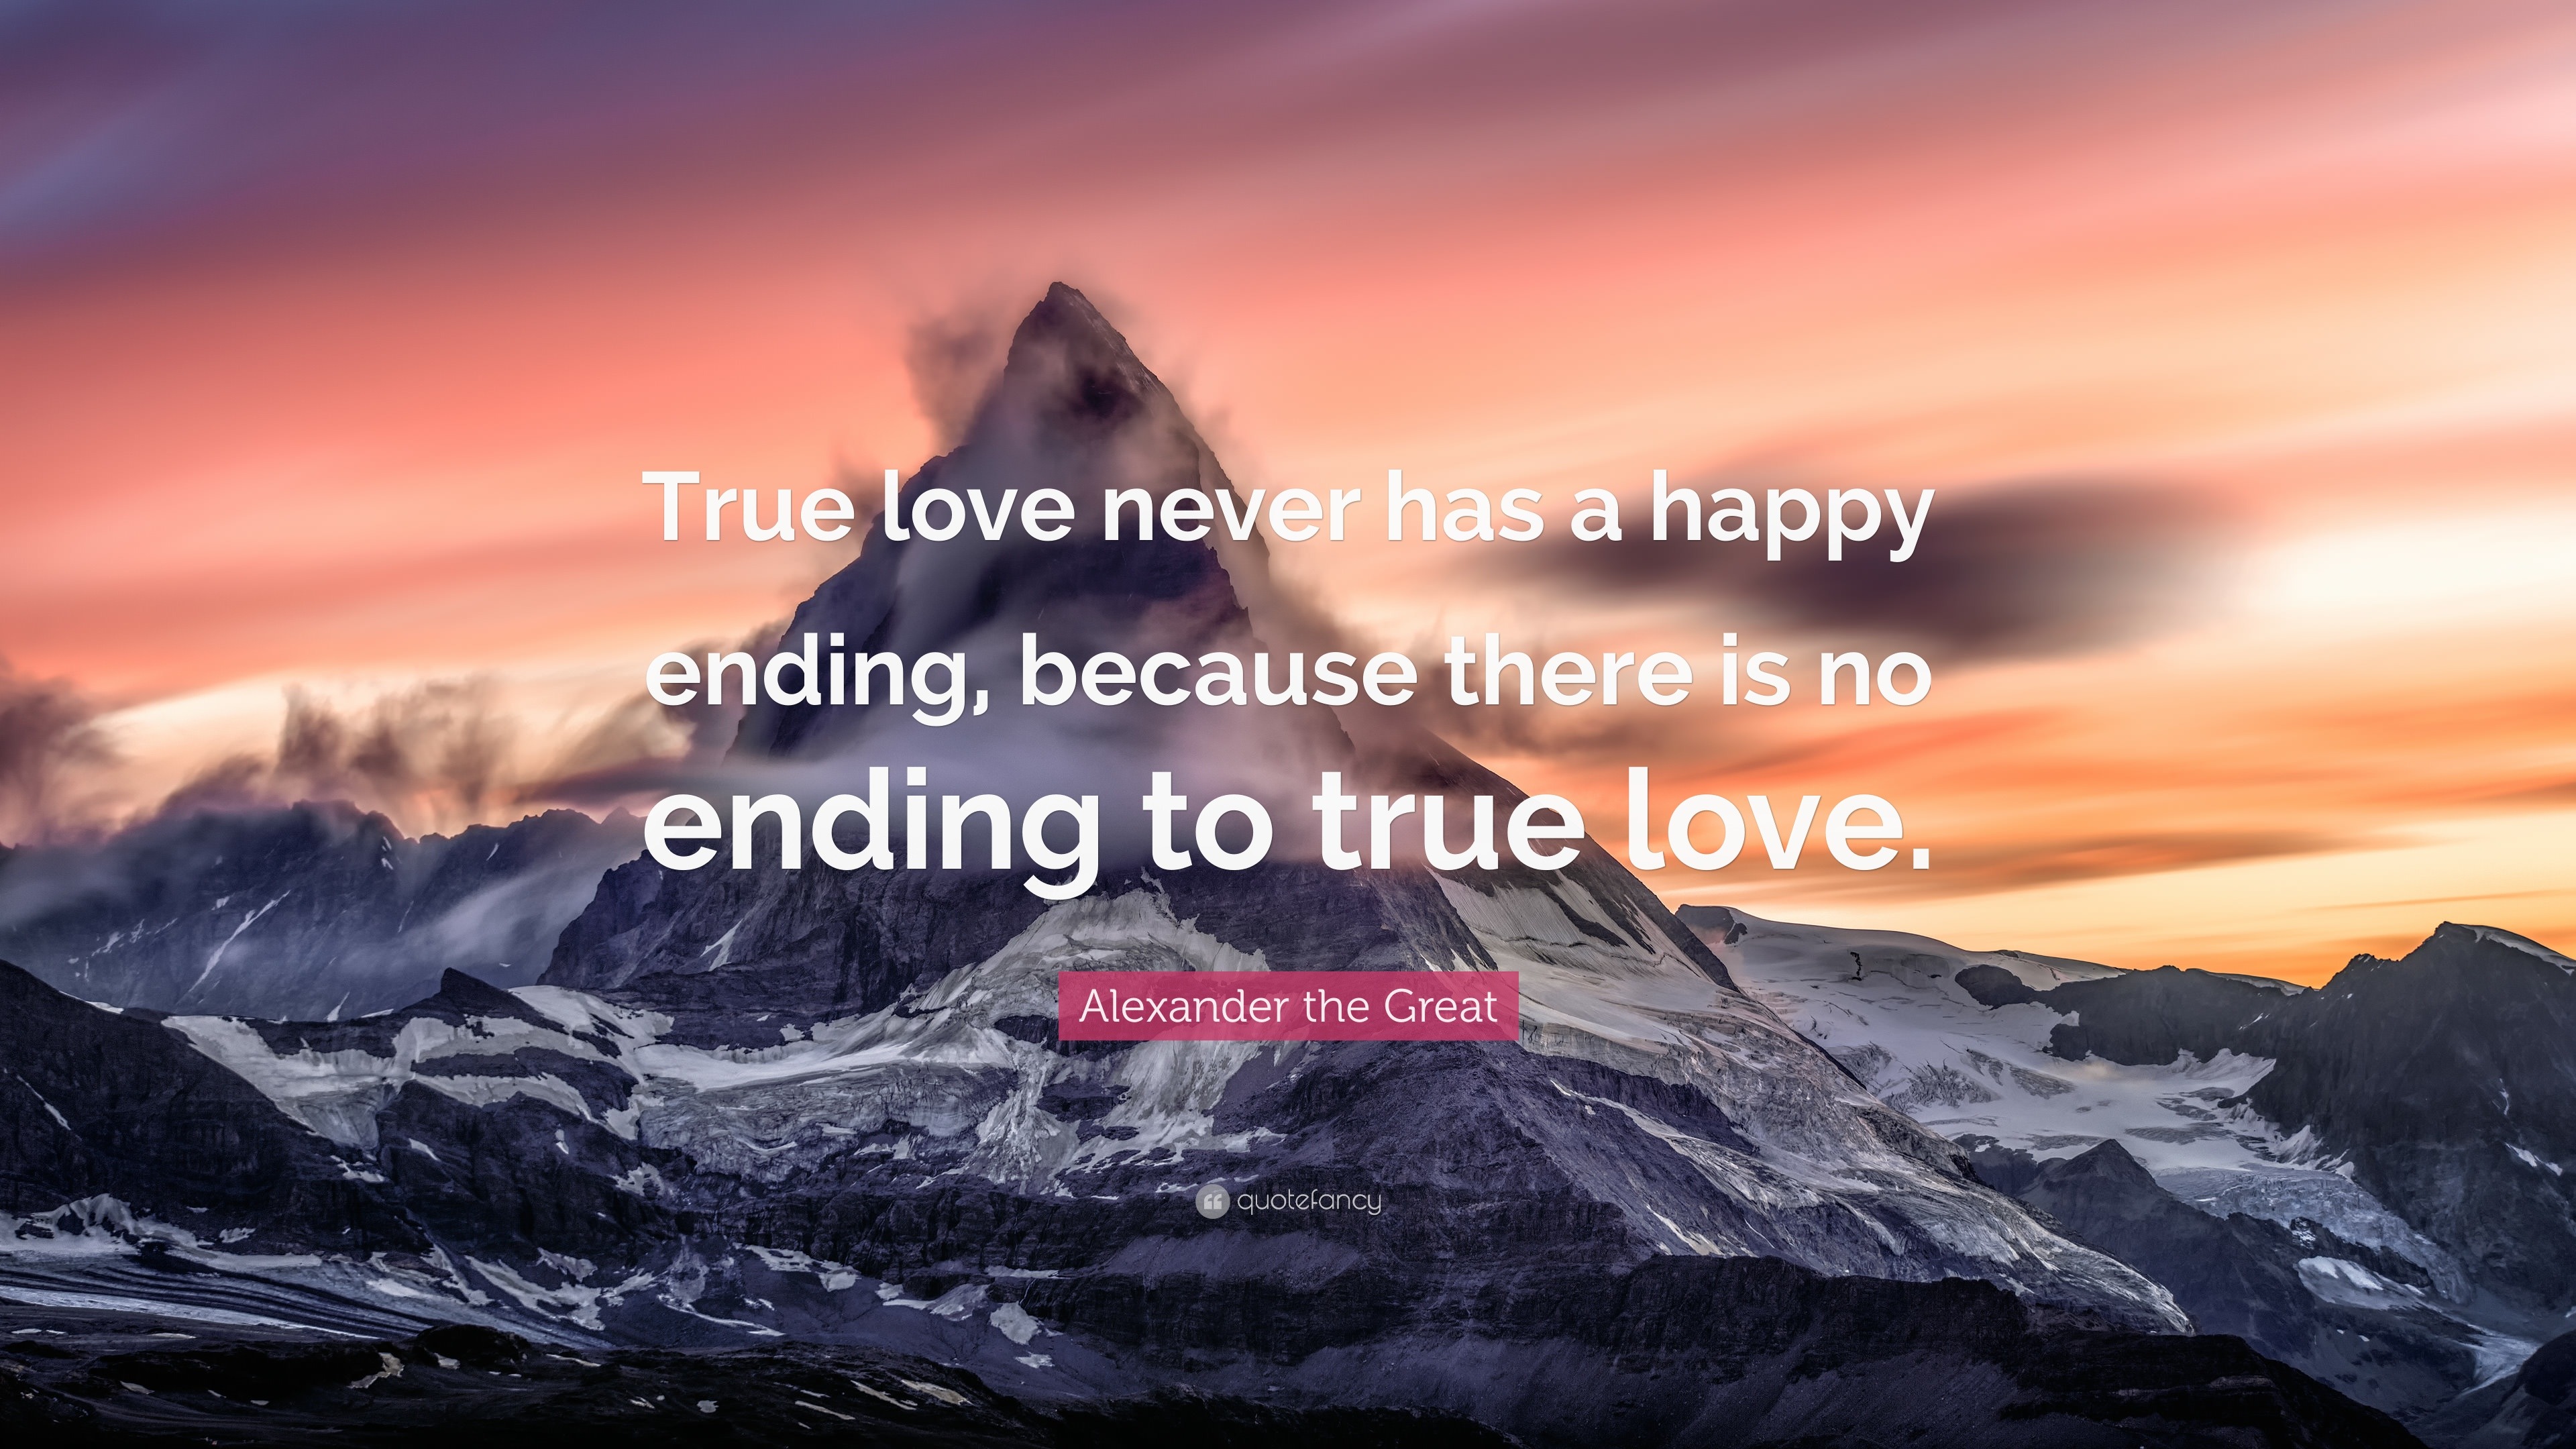 Alexander the Great Quote True love never has a happy ending